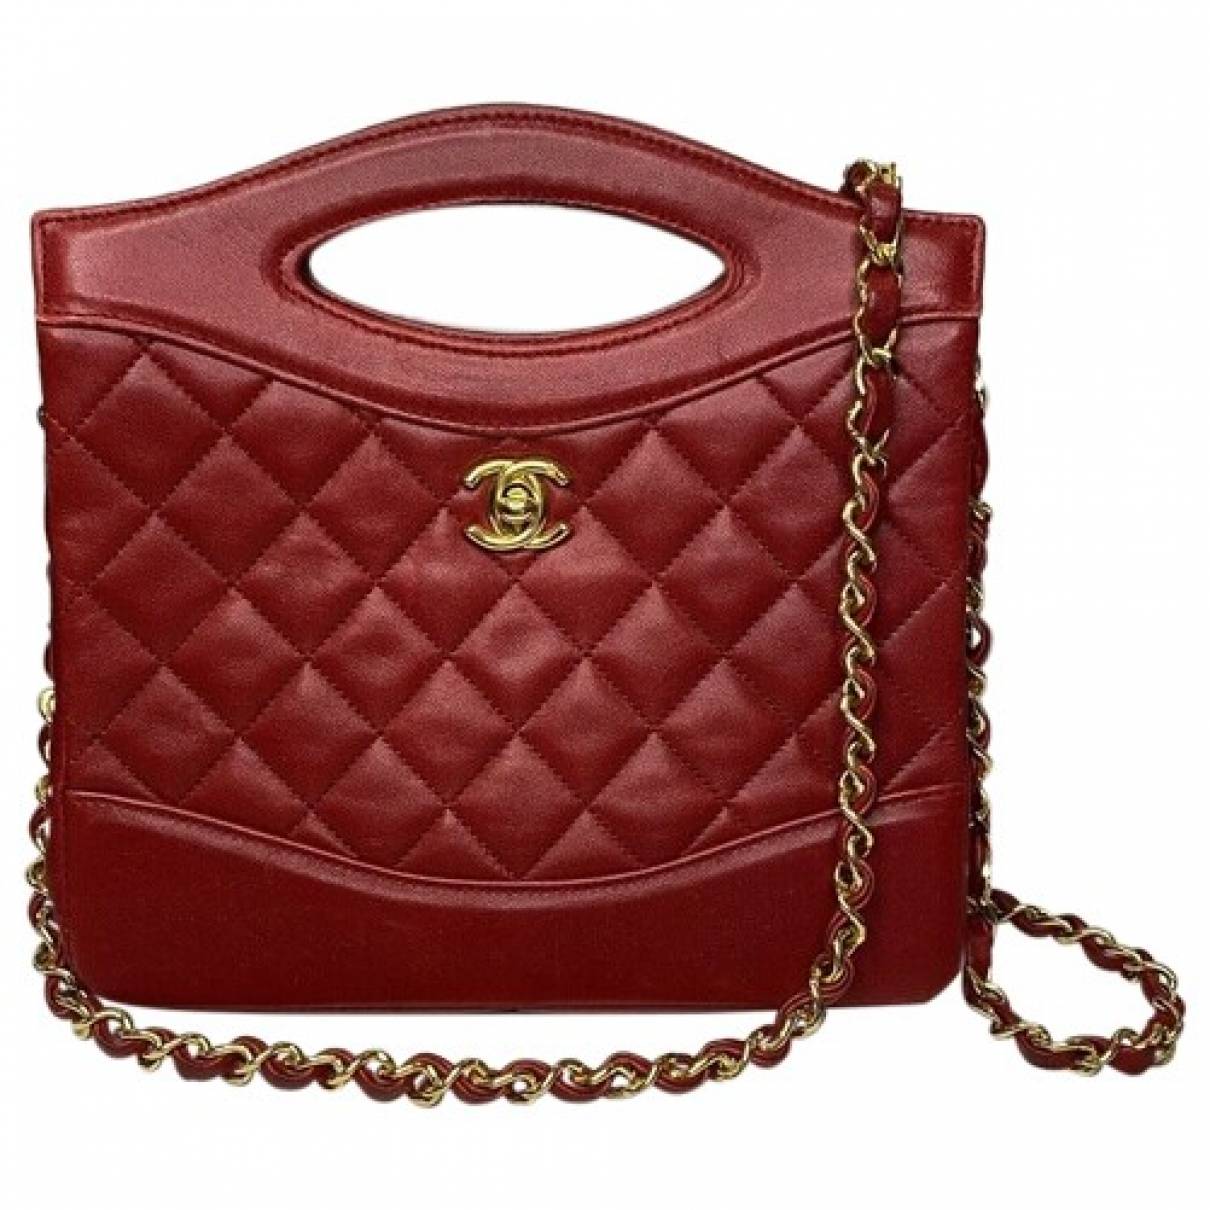 East west chocolate bar leather handbag Chanel Red in Leather - 26134887